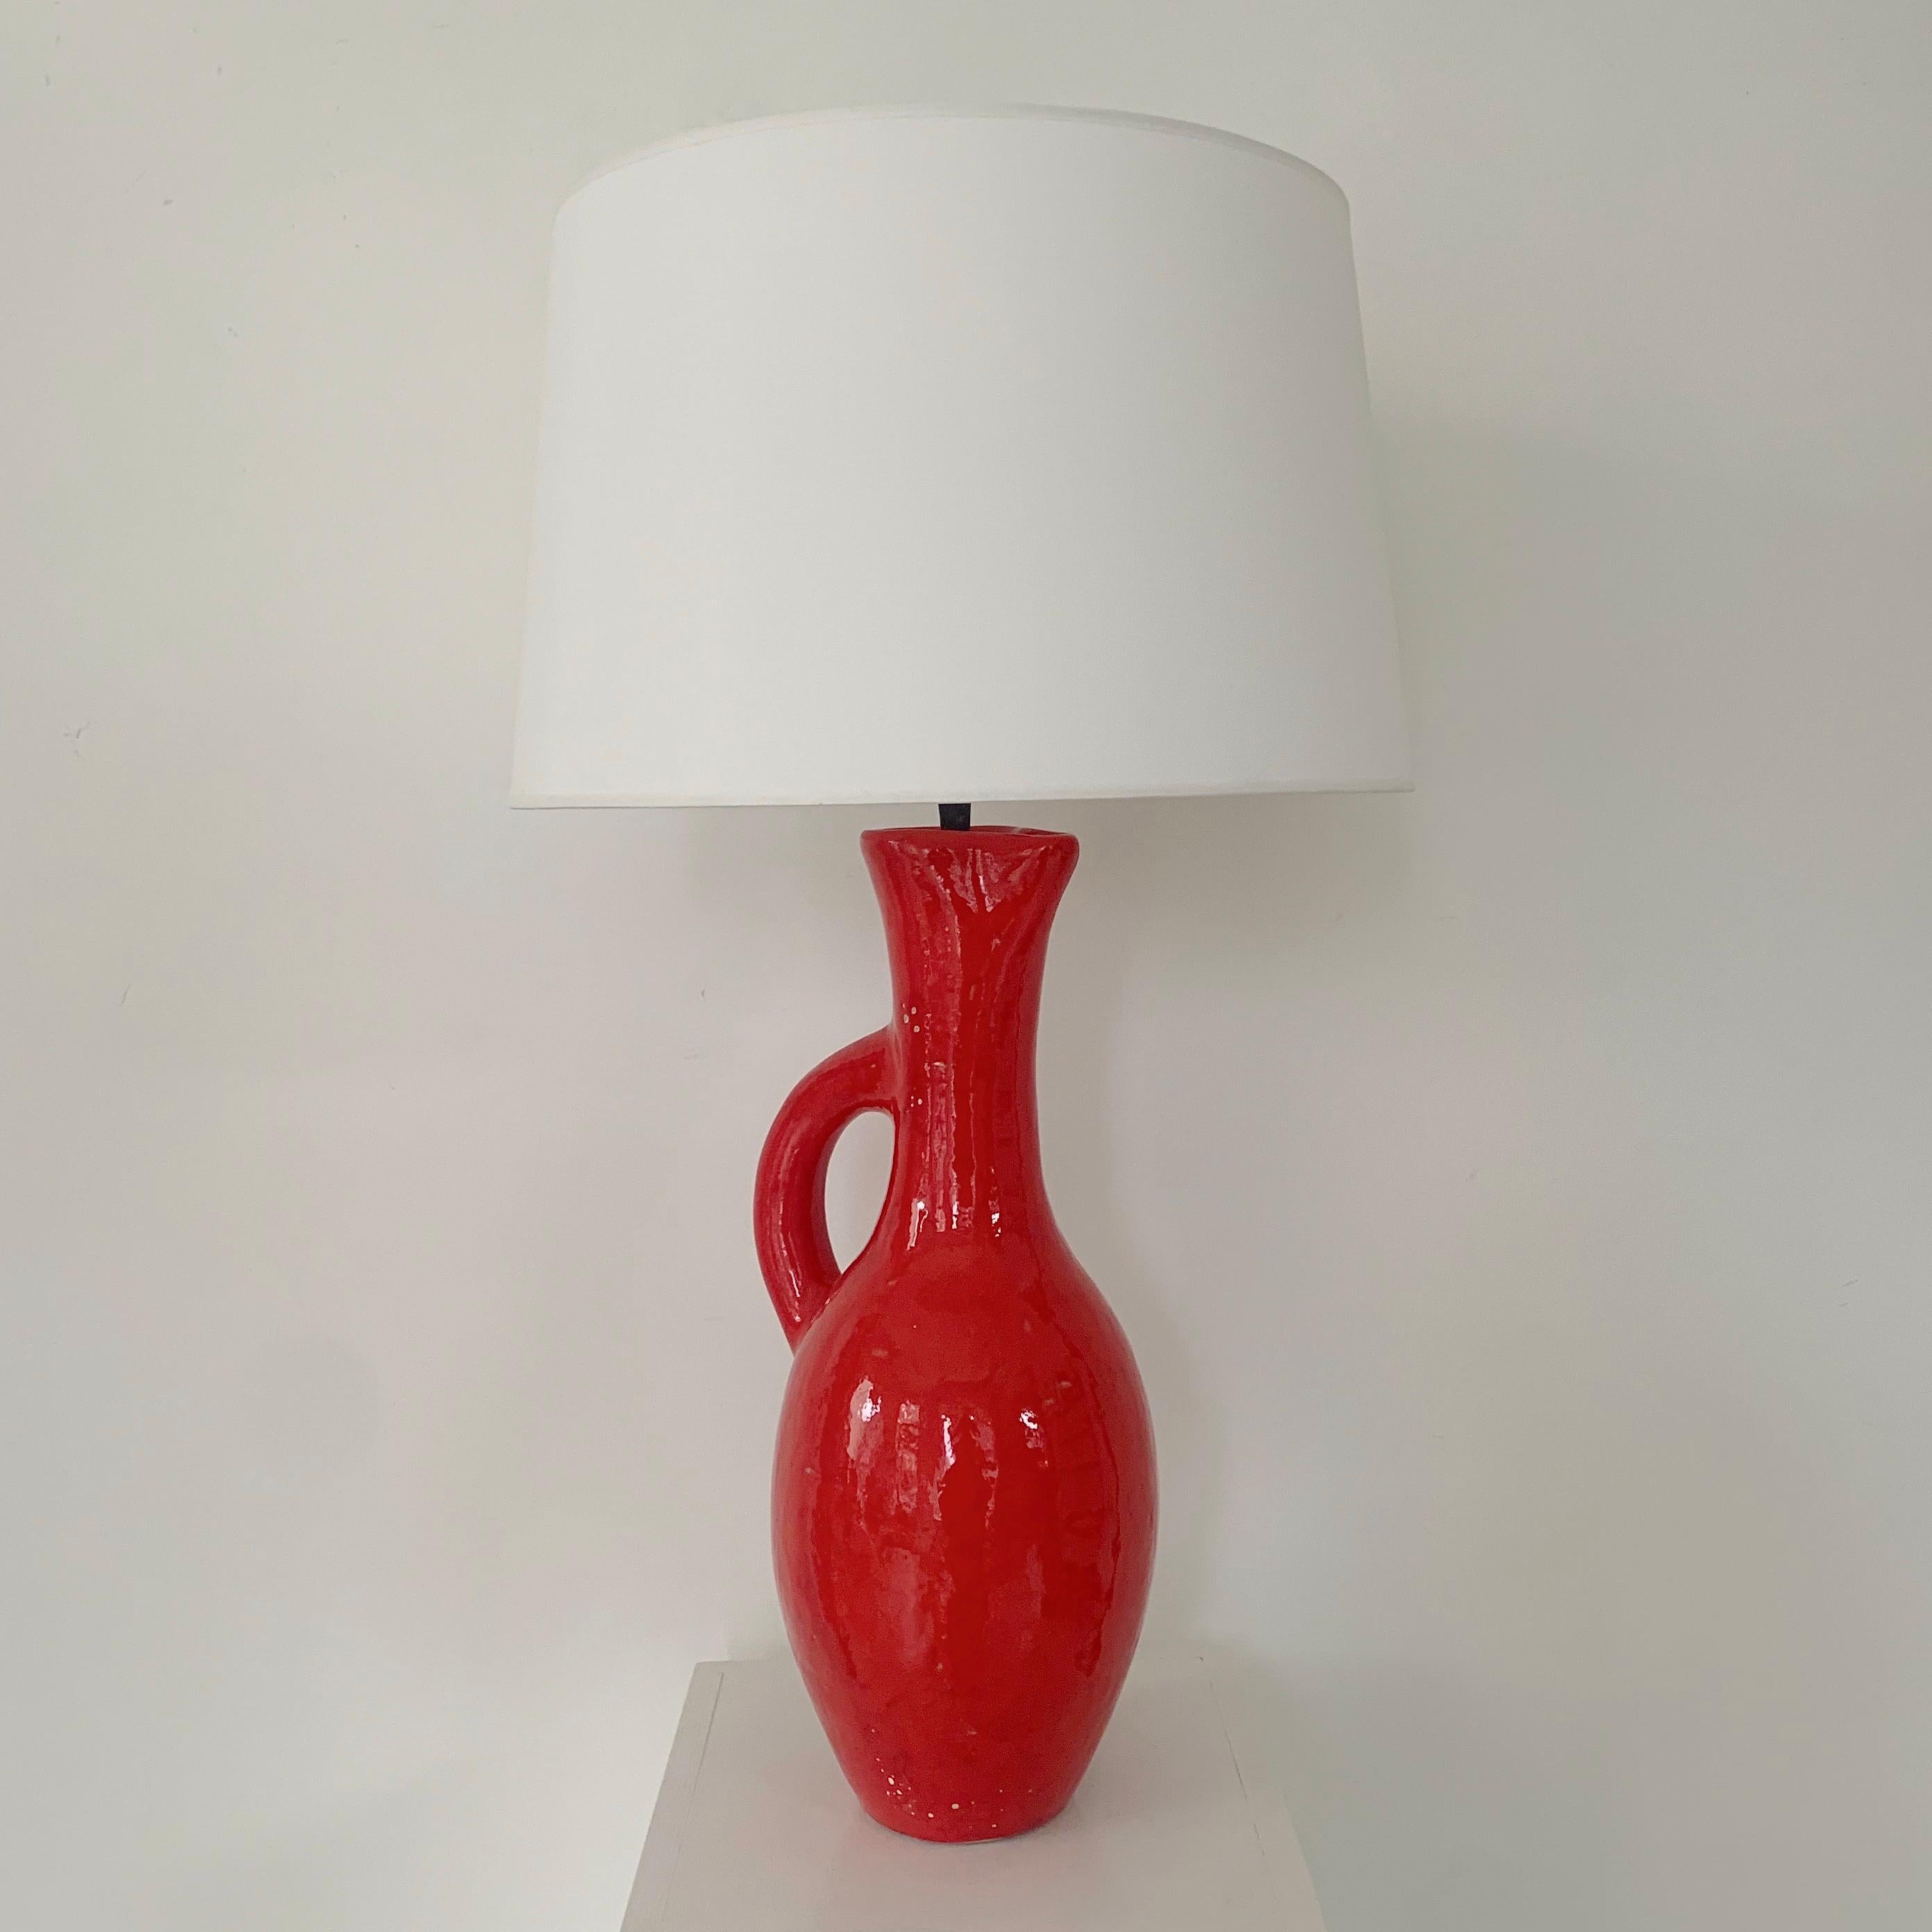 French Les Archanges/Gilbert Valentin Large Signed Table Lamp, 1950s, Vallauris.